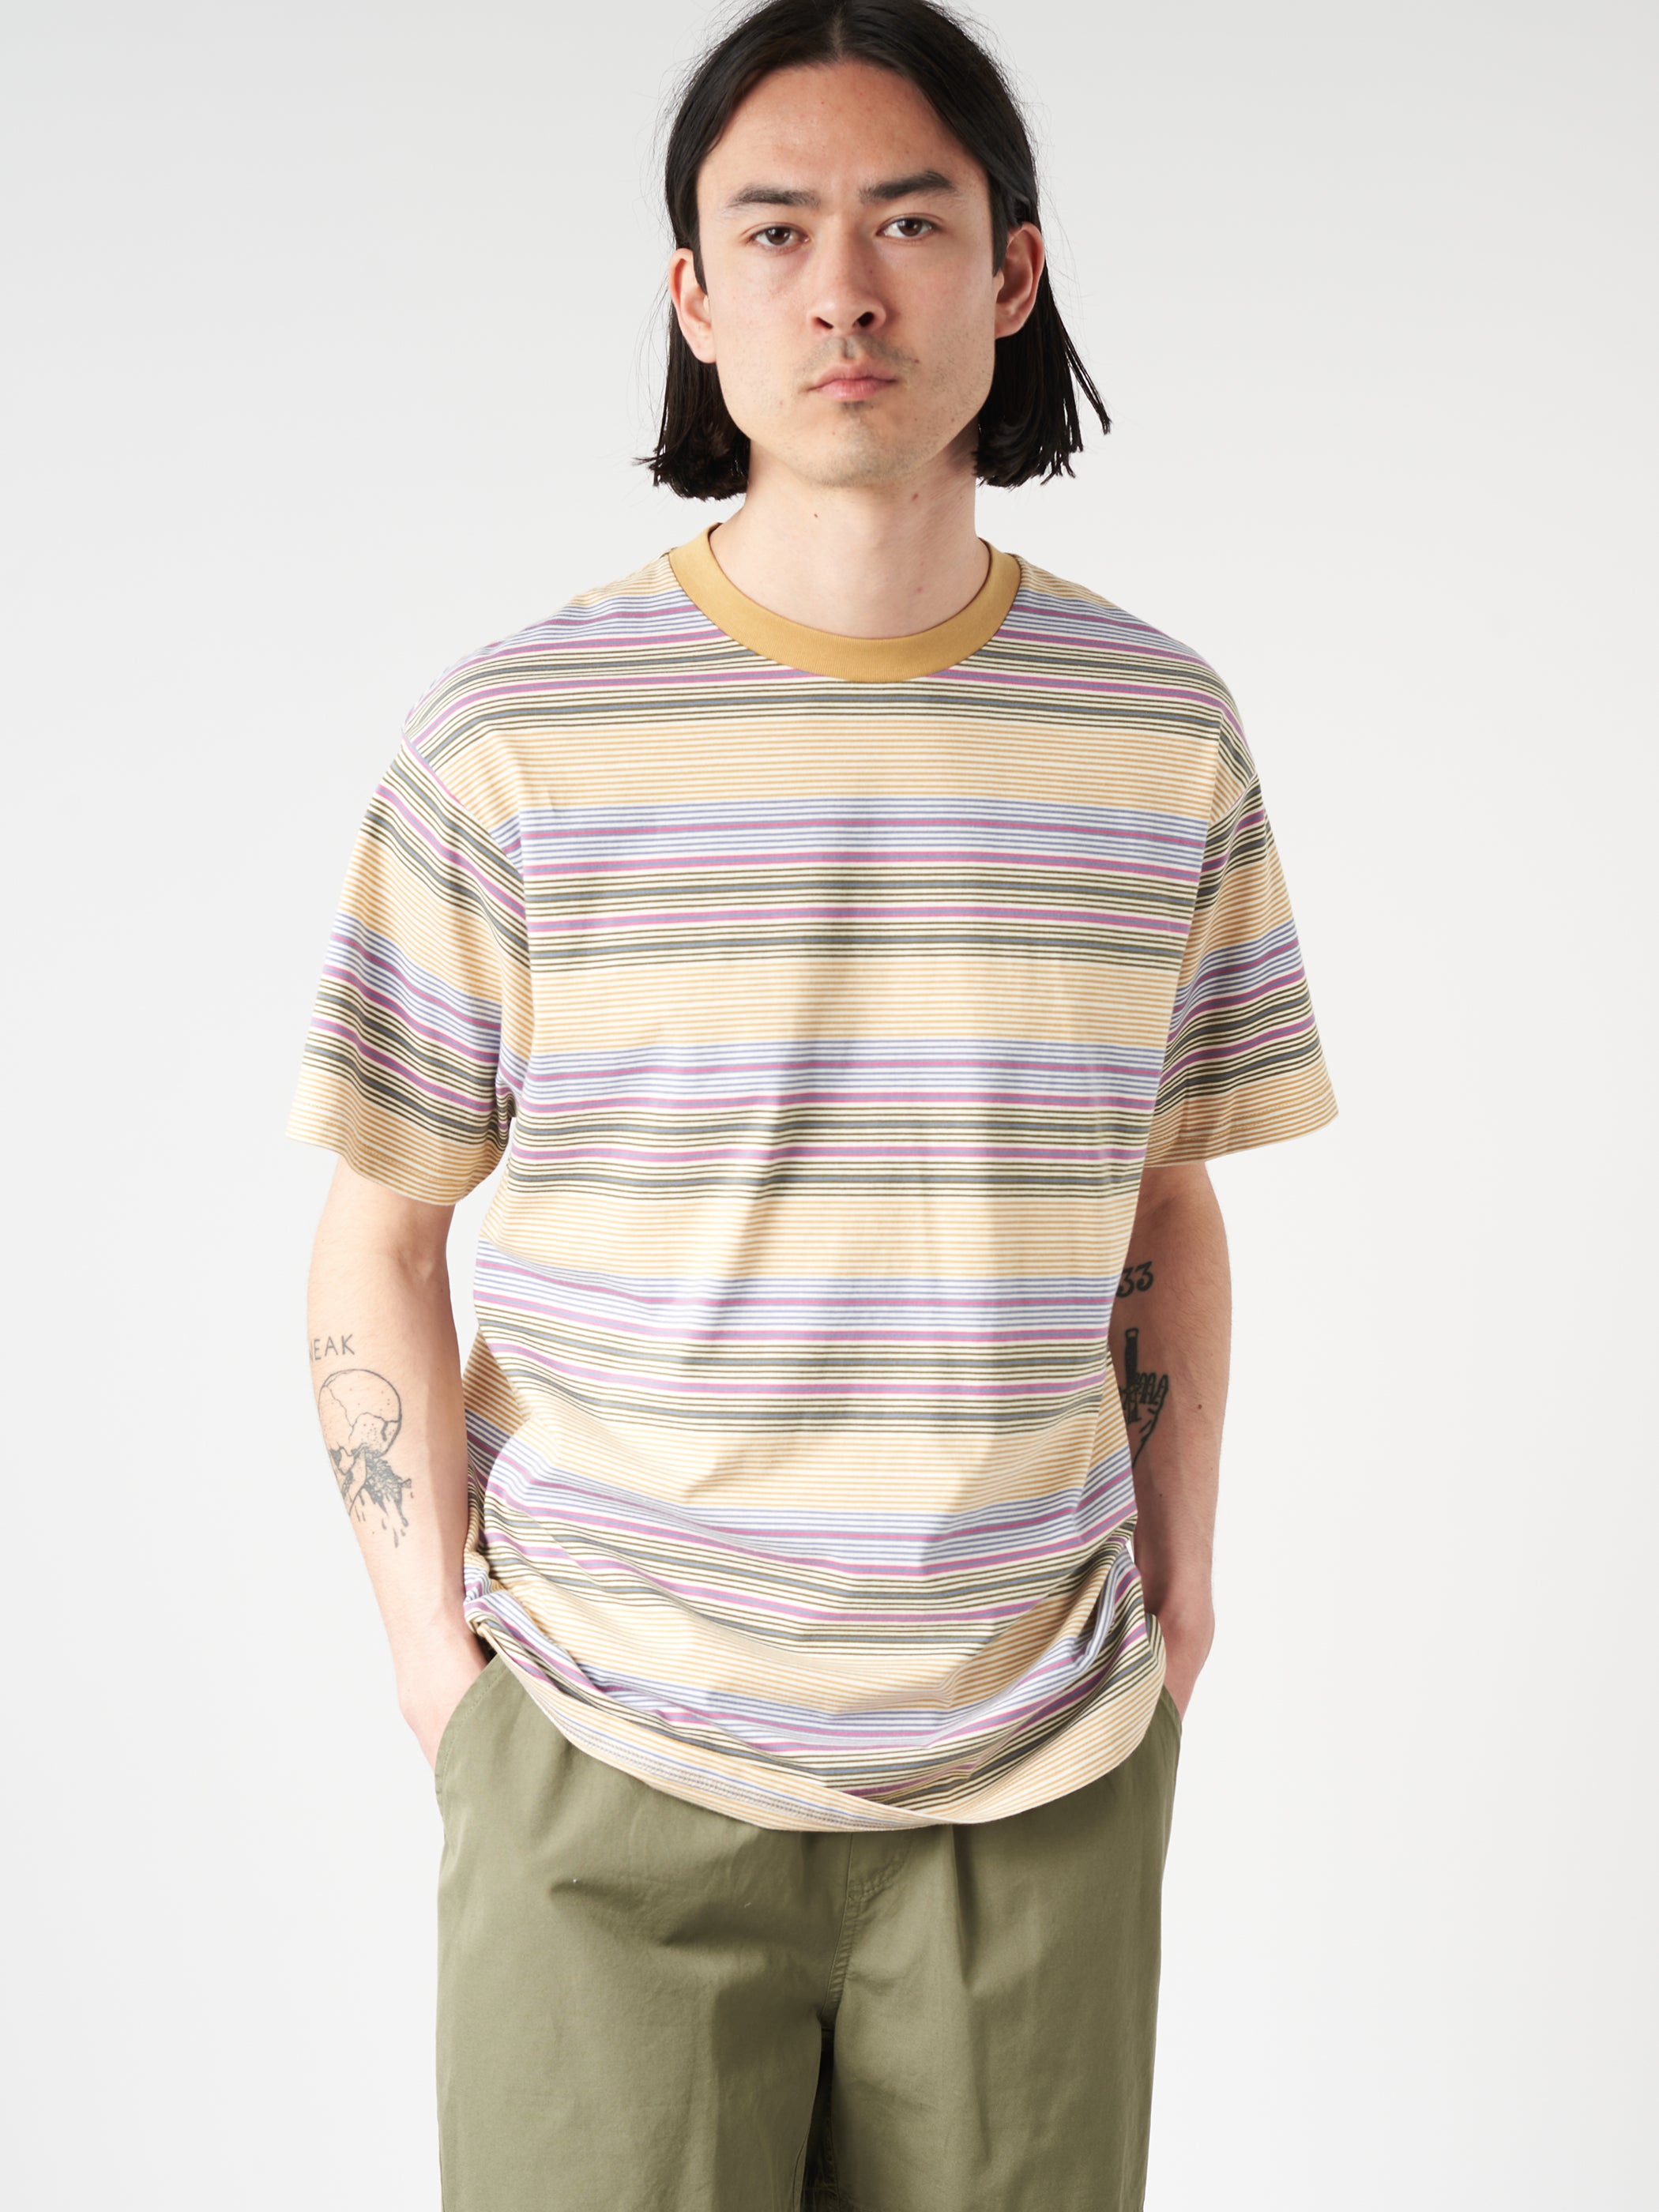 S/S Colby T-Shirt